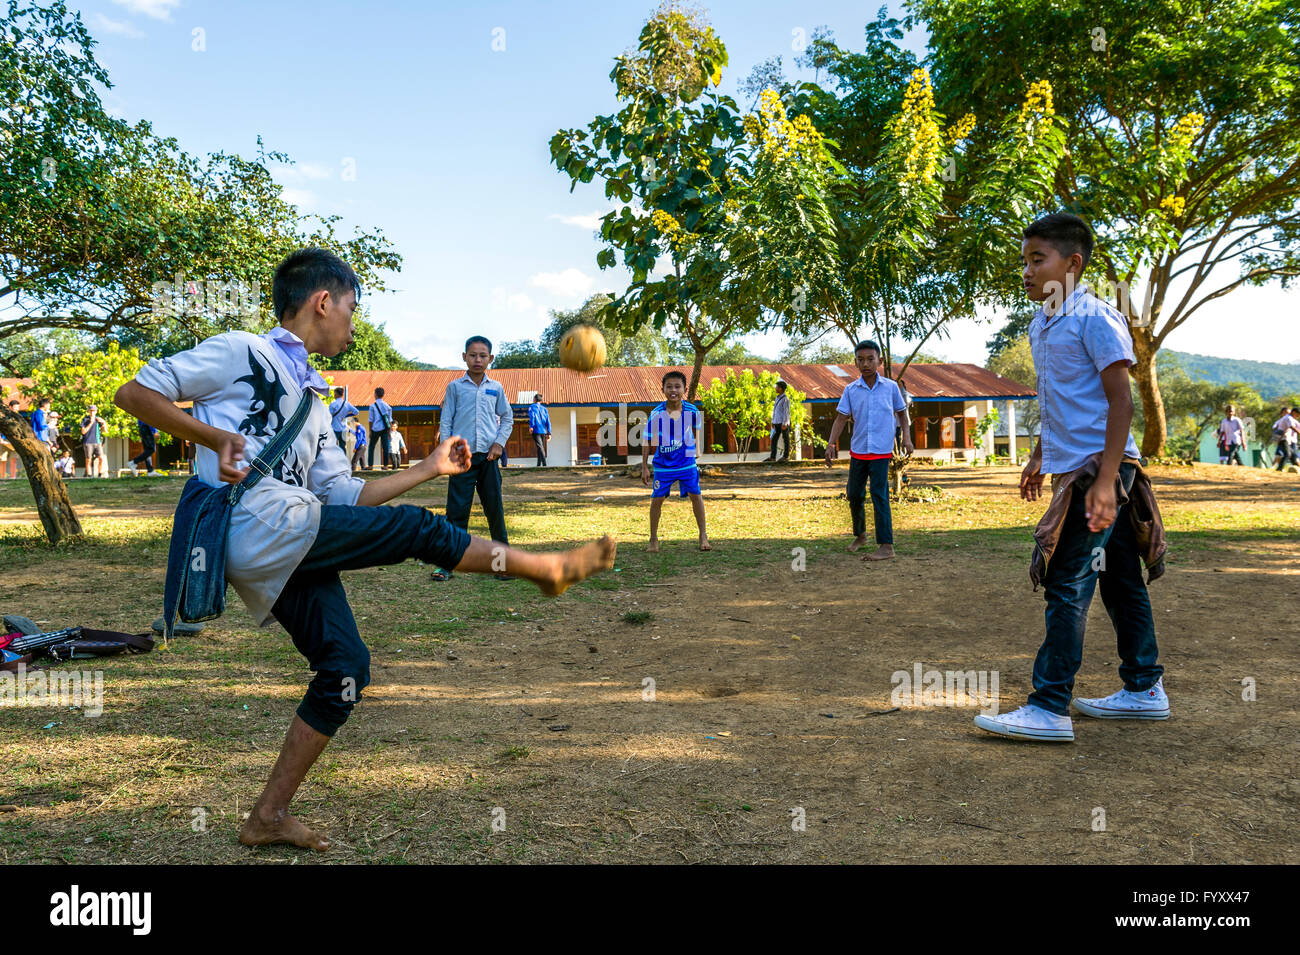 Asia. South-East Asia. Laos. Province of Luang Prabang. Elementary school in a rural village. Boys playing Sepak Takraw. Stock Photo